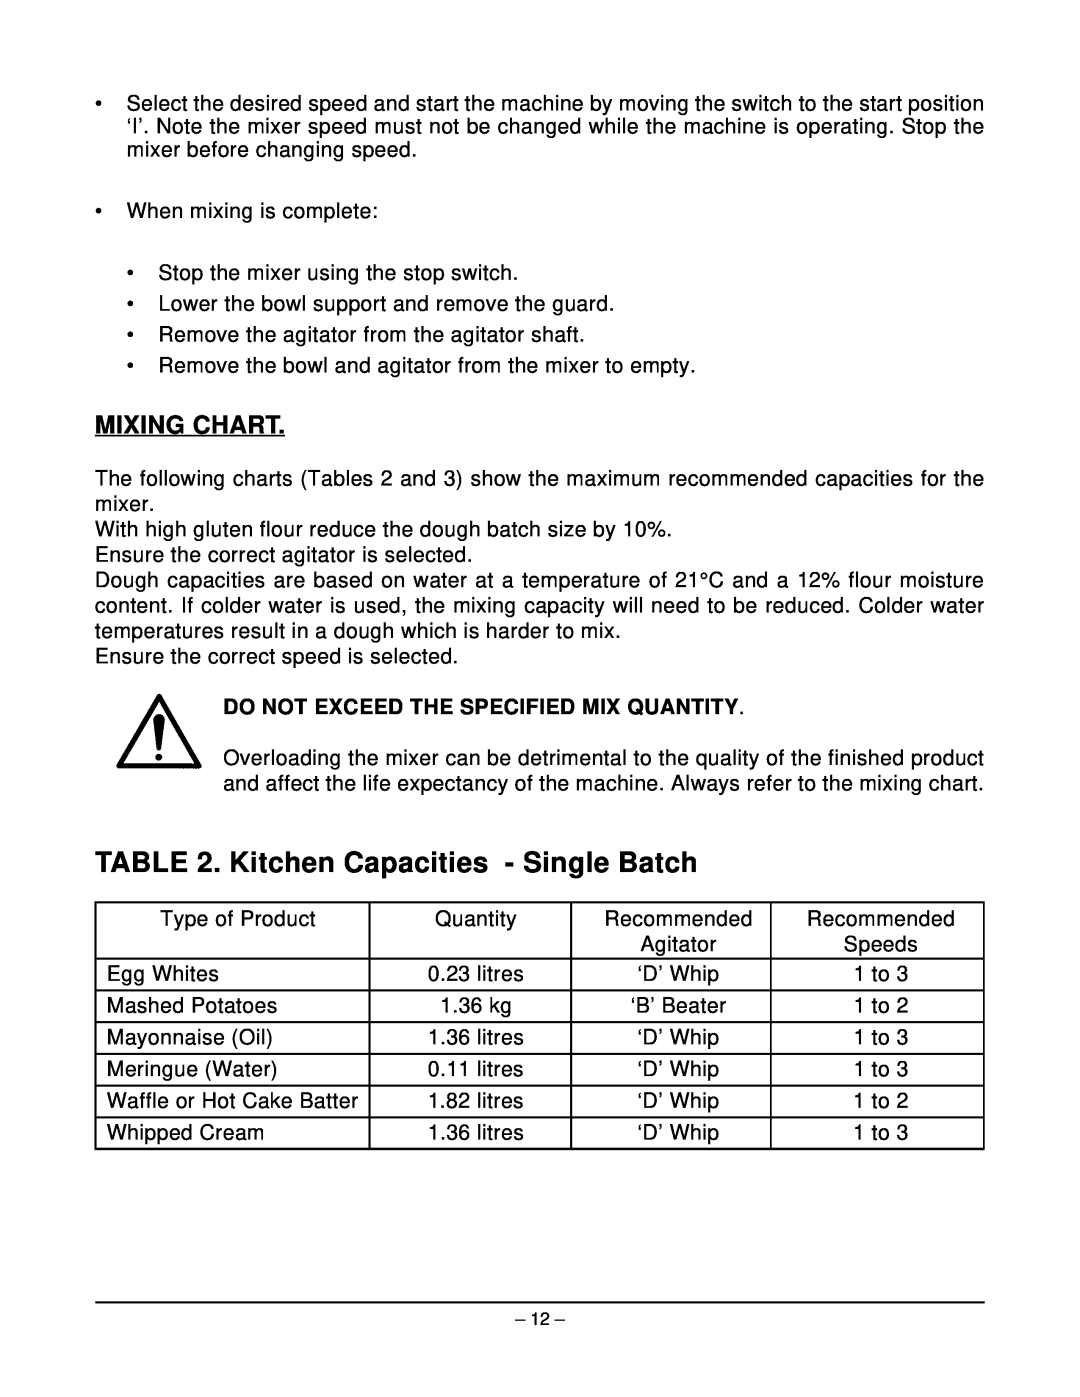 Hobart N50 MIXER manual Kitchen Capacities - Single Batch, Mixing Chart, Do Not Exceed The Specified Mix Quantity 